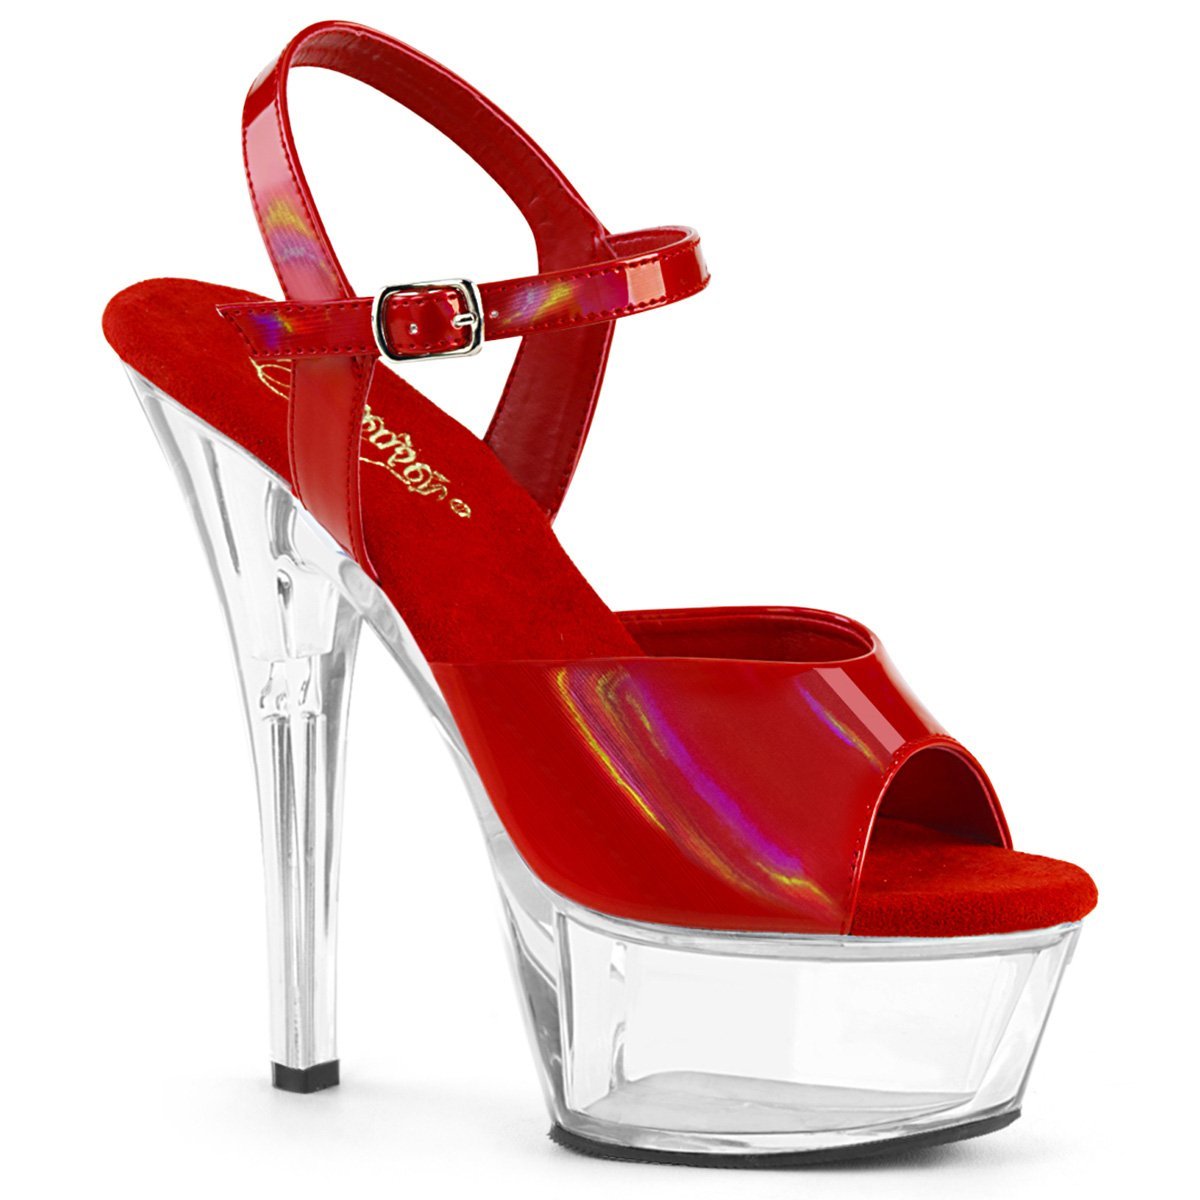 PLEASER KISS-209BHG RED BRUSHED HOLOGRAPHIC CLEAR 6 INCH HIGH HEEL PLATFORM SHOES SIZE 6